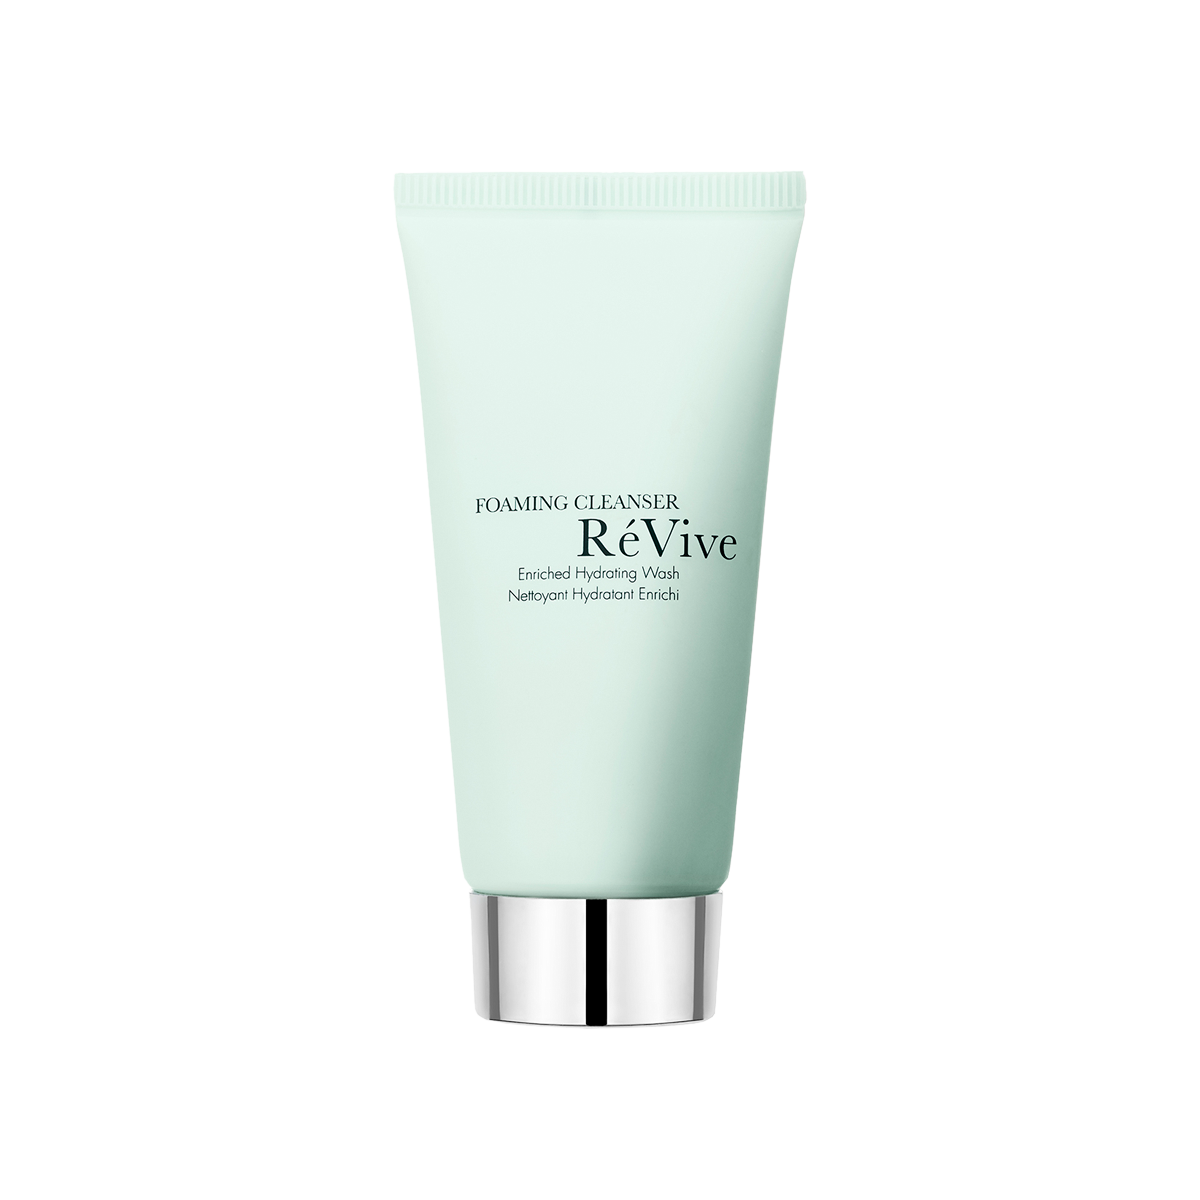 Revive - Foaming Cleanser